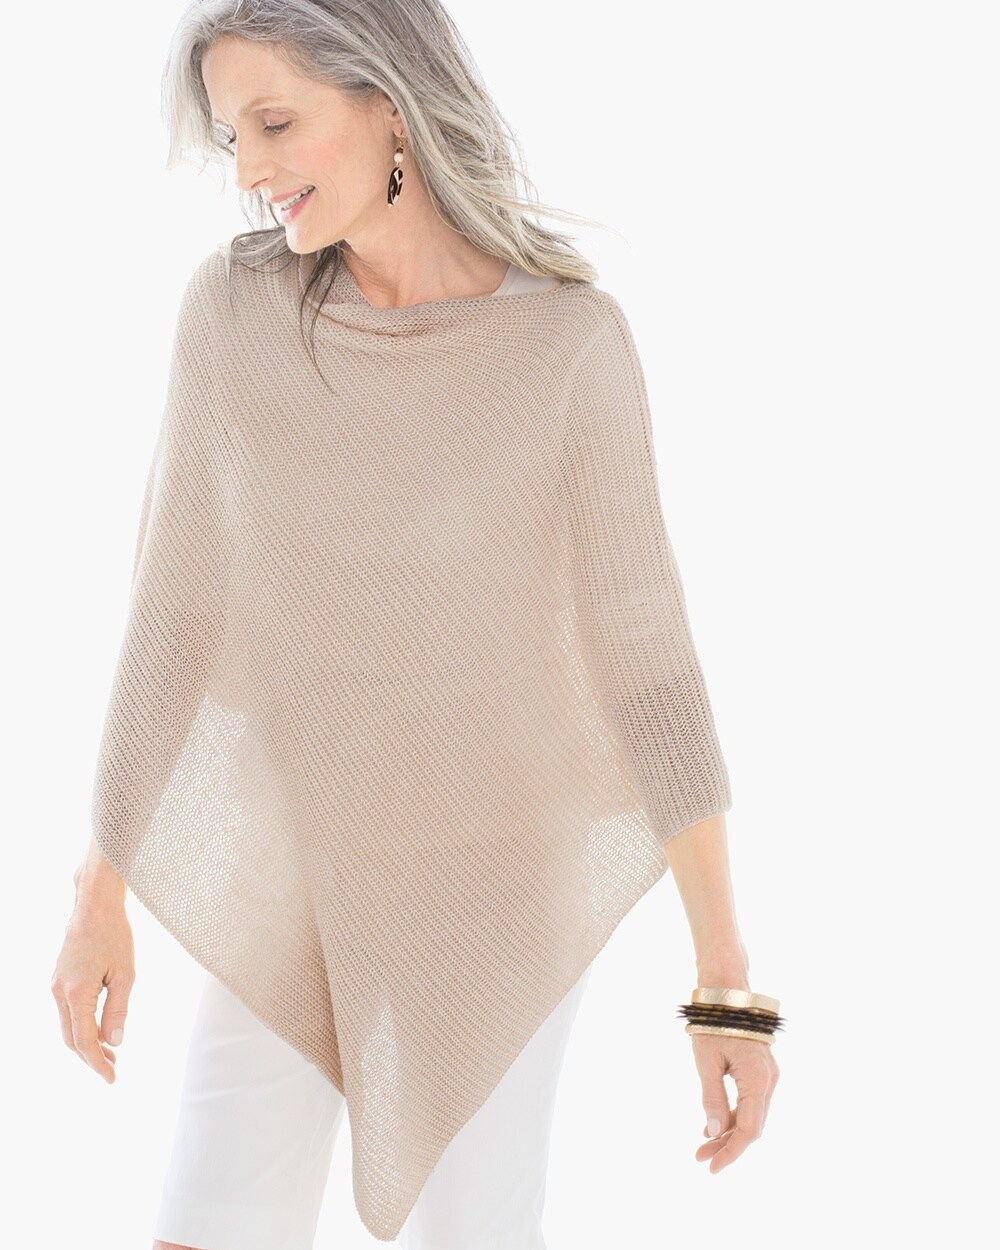 Sutton Poncho in Feather Tan